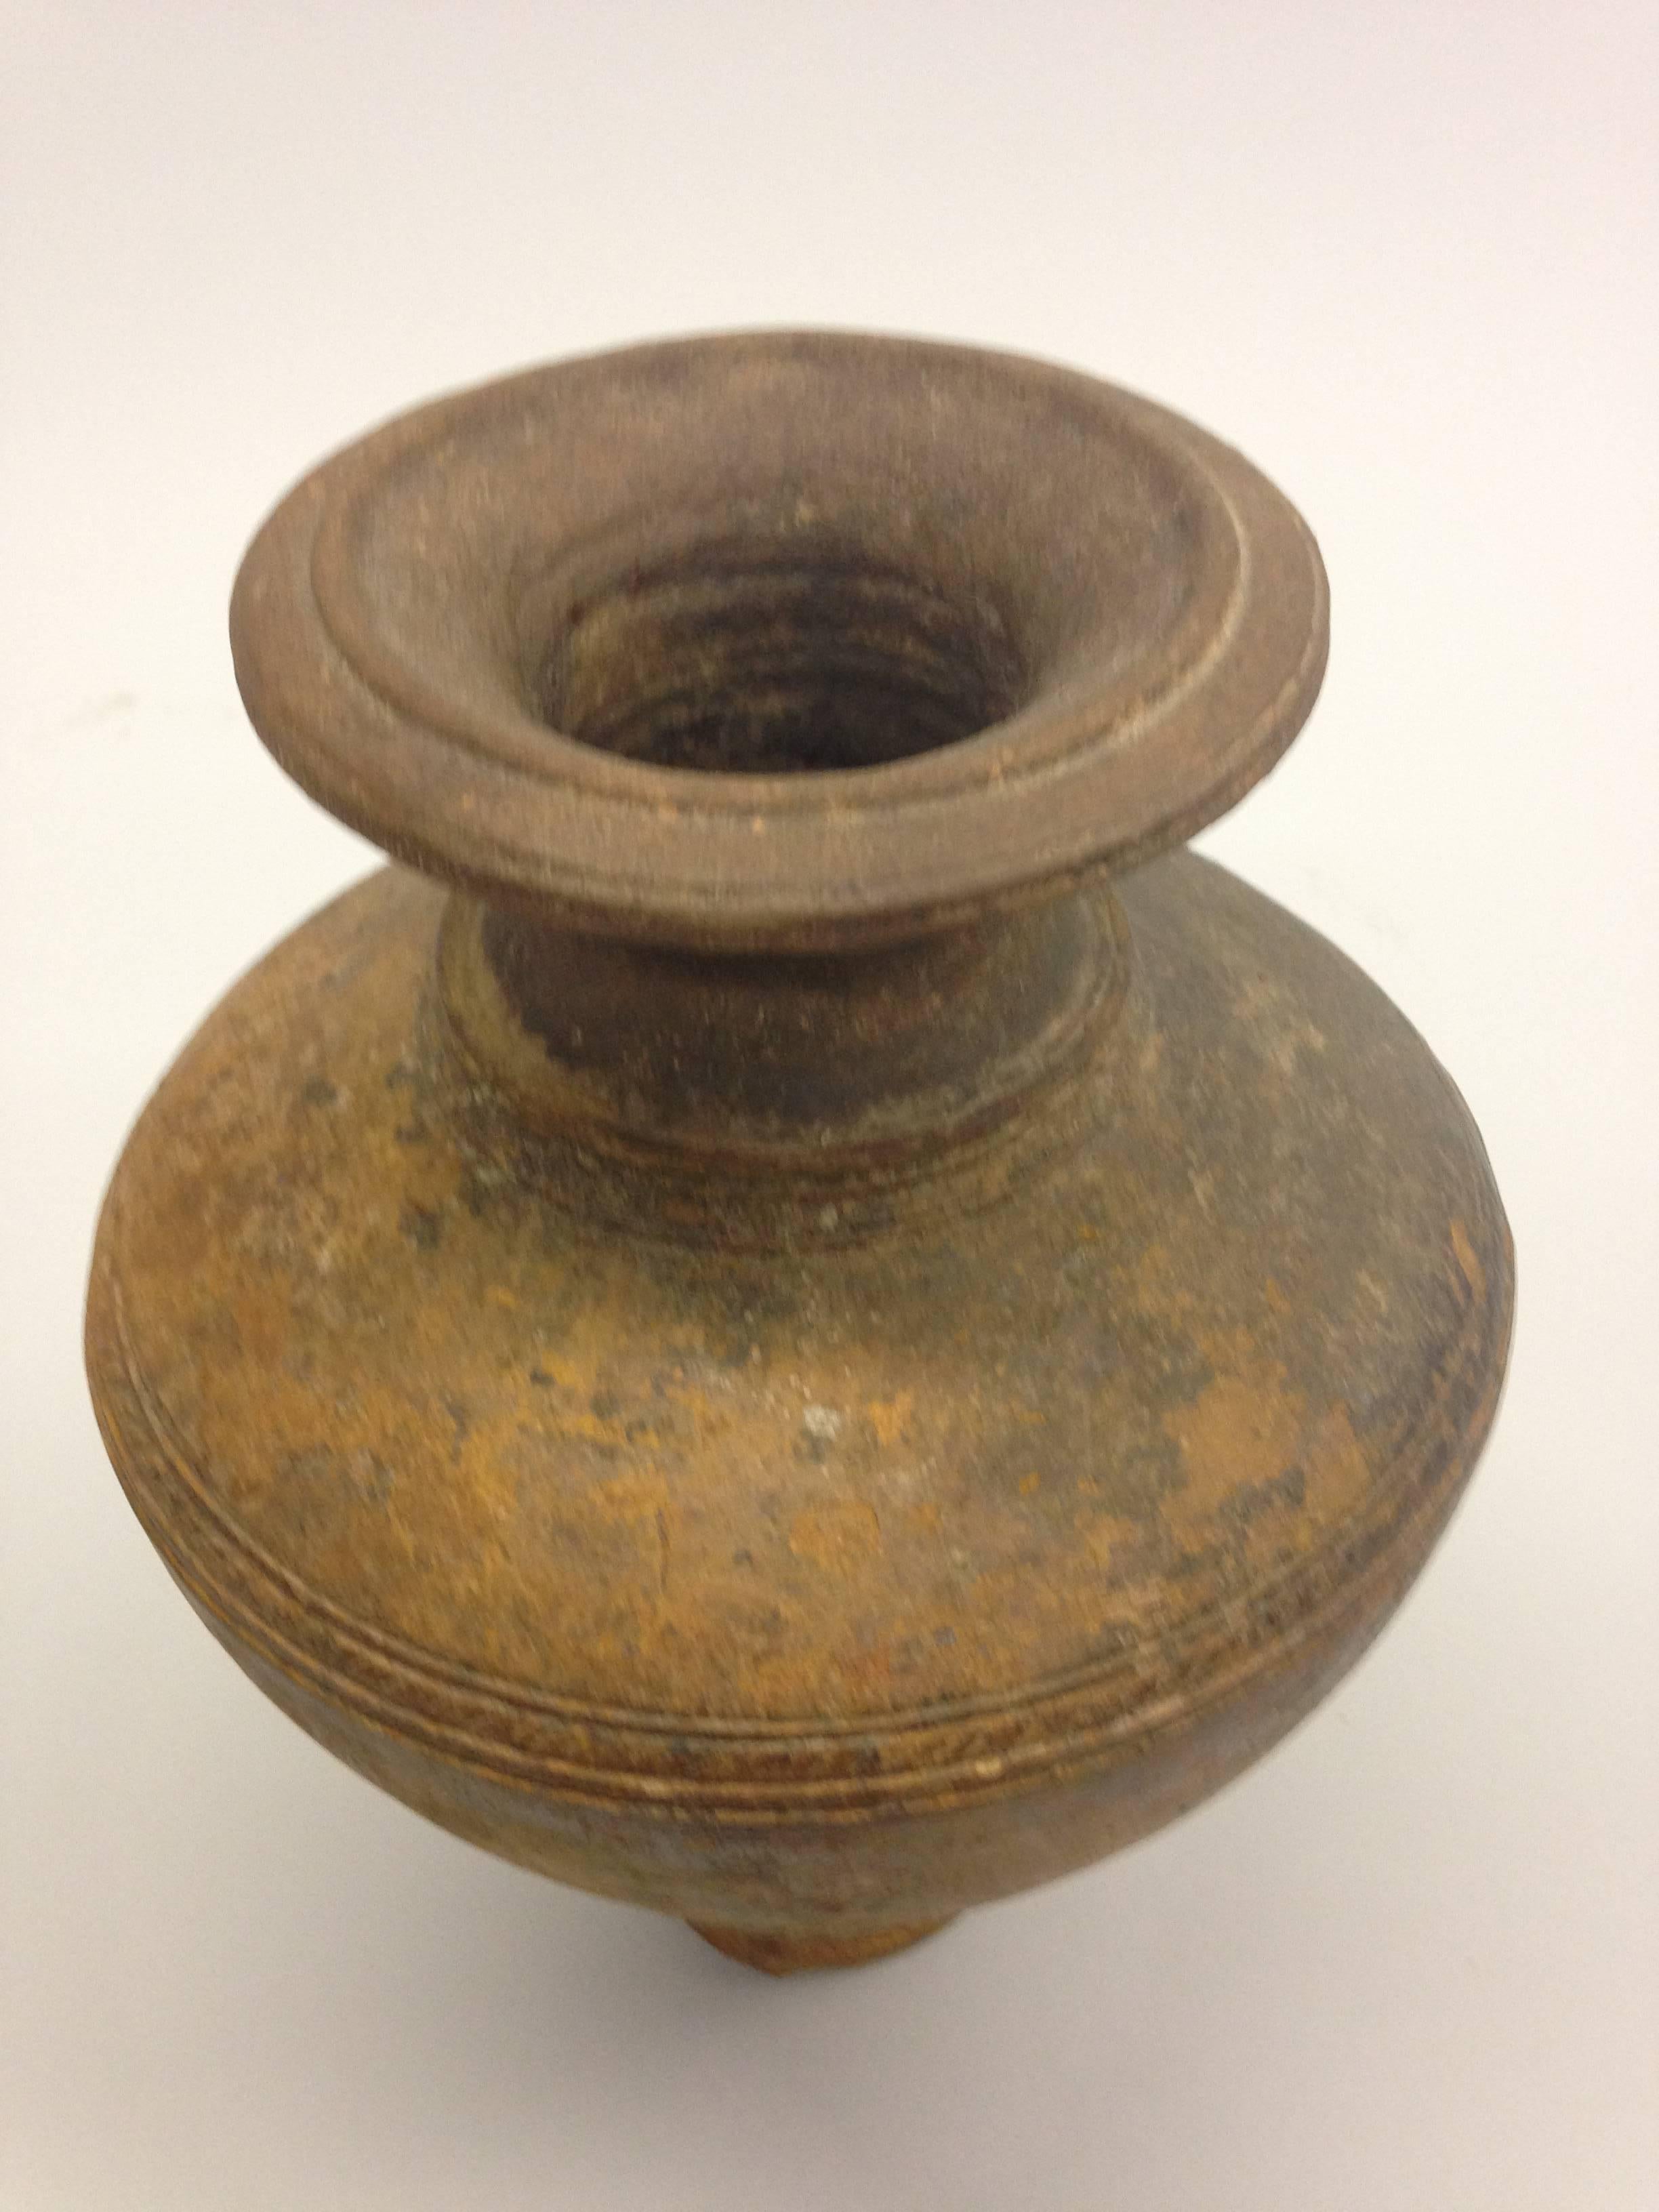 Ancient Classic Form Khmer Urn or Vase For Sale at 1stDibs | ancient ...